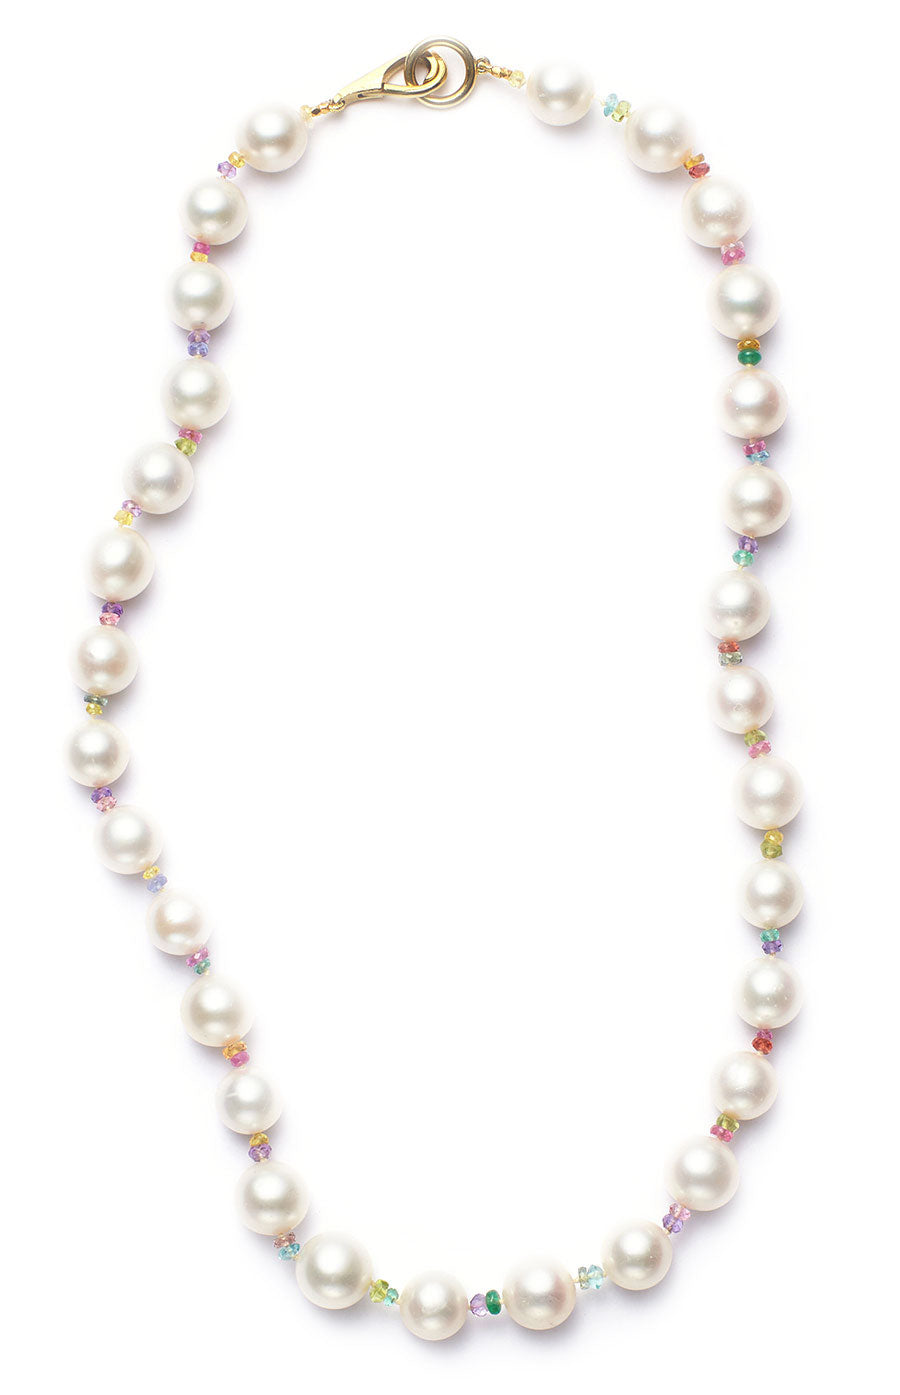 Shop Jewelry - Colorful Mushroom and Pearls Necklace l MCHARMS